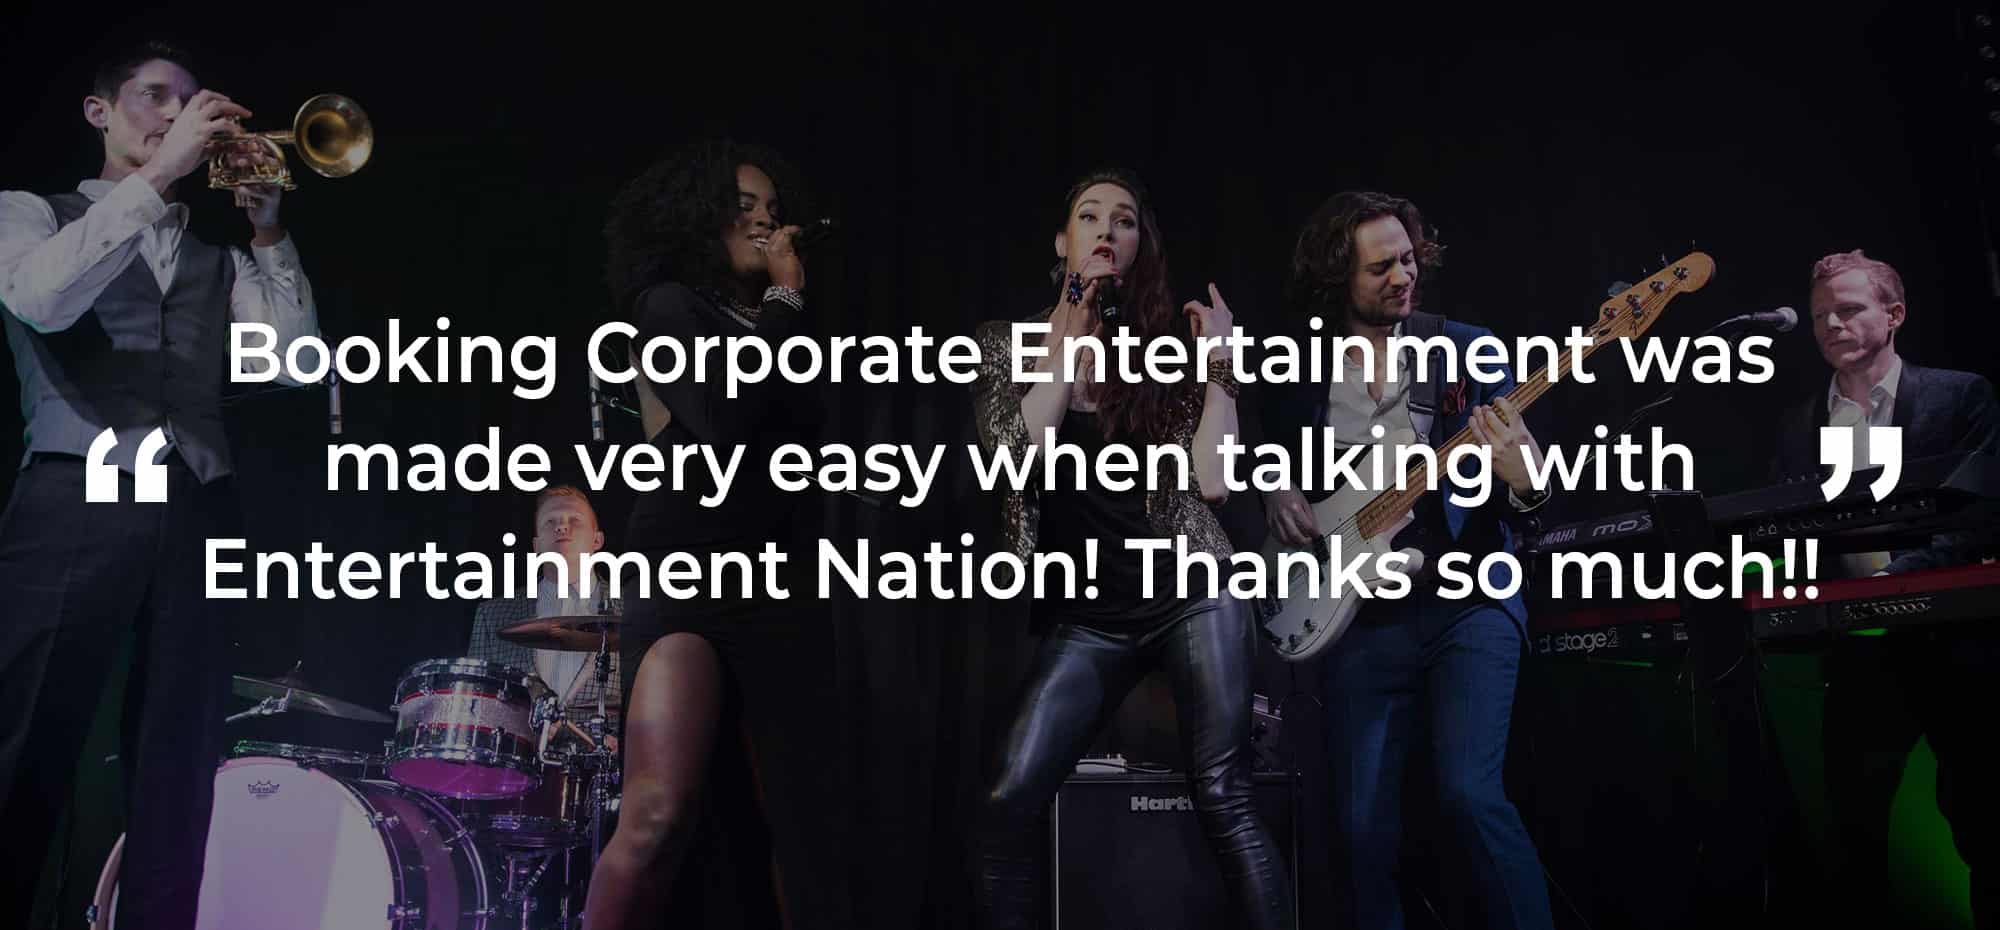 Review of Corporate Entertainment Derby